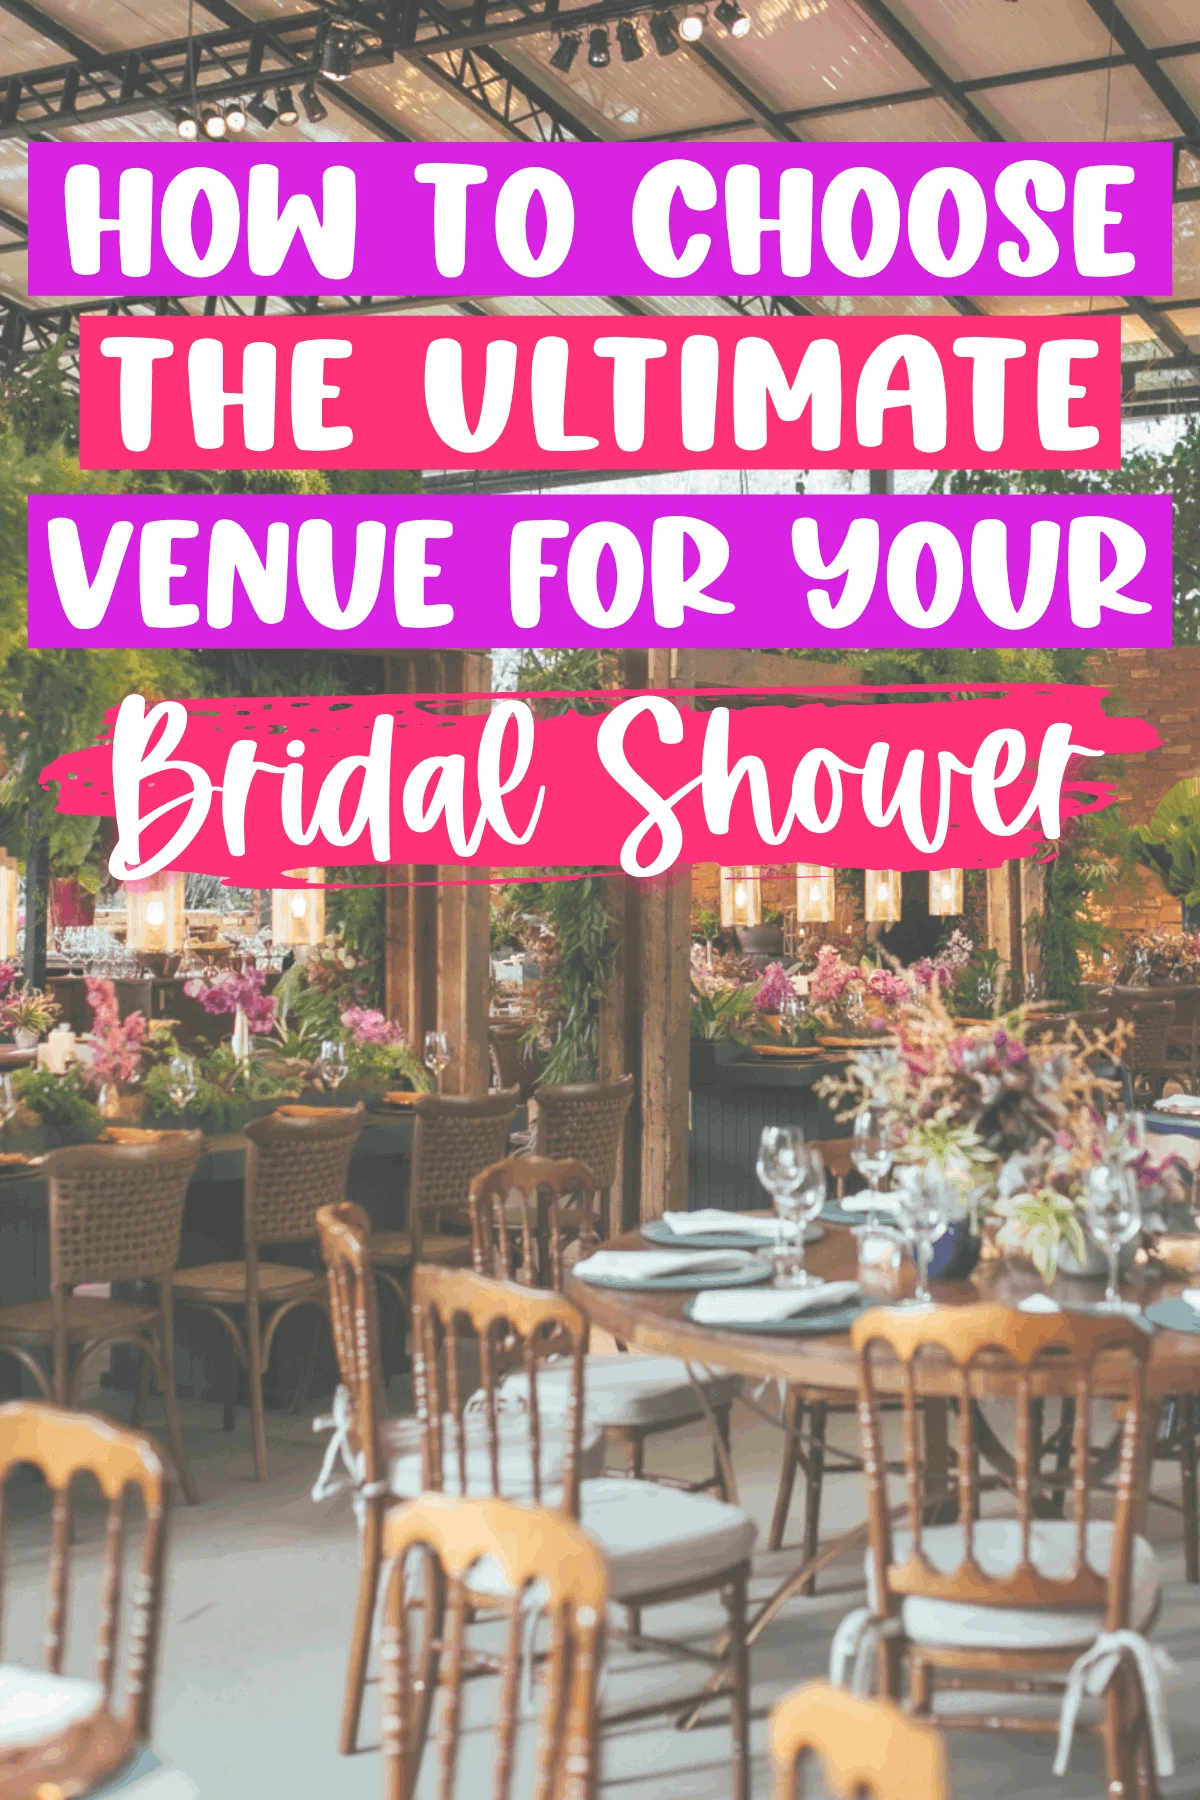 7 Places to Have a Bridal Shower